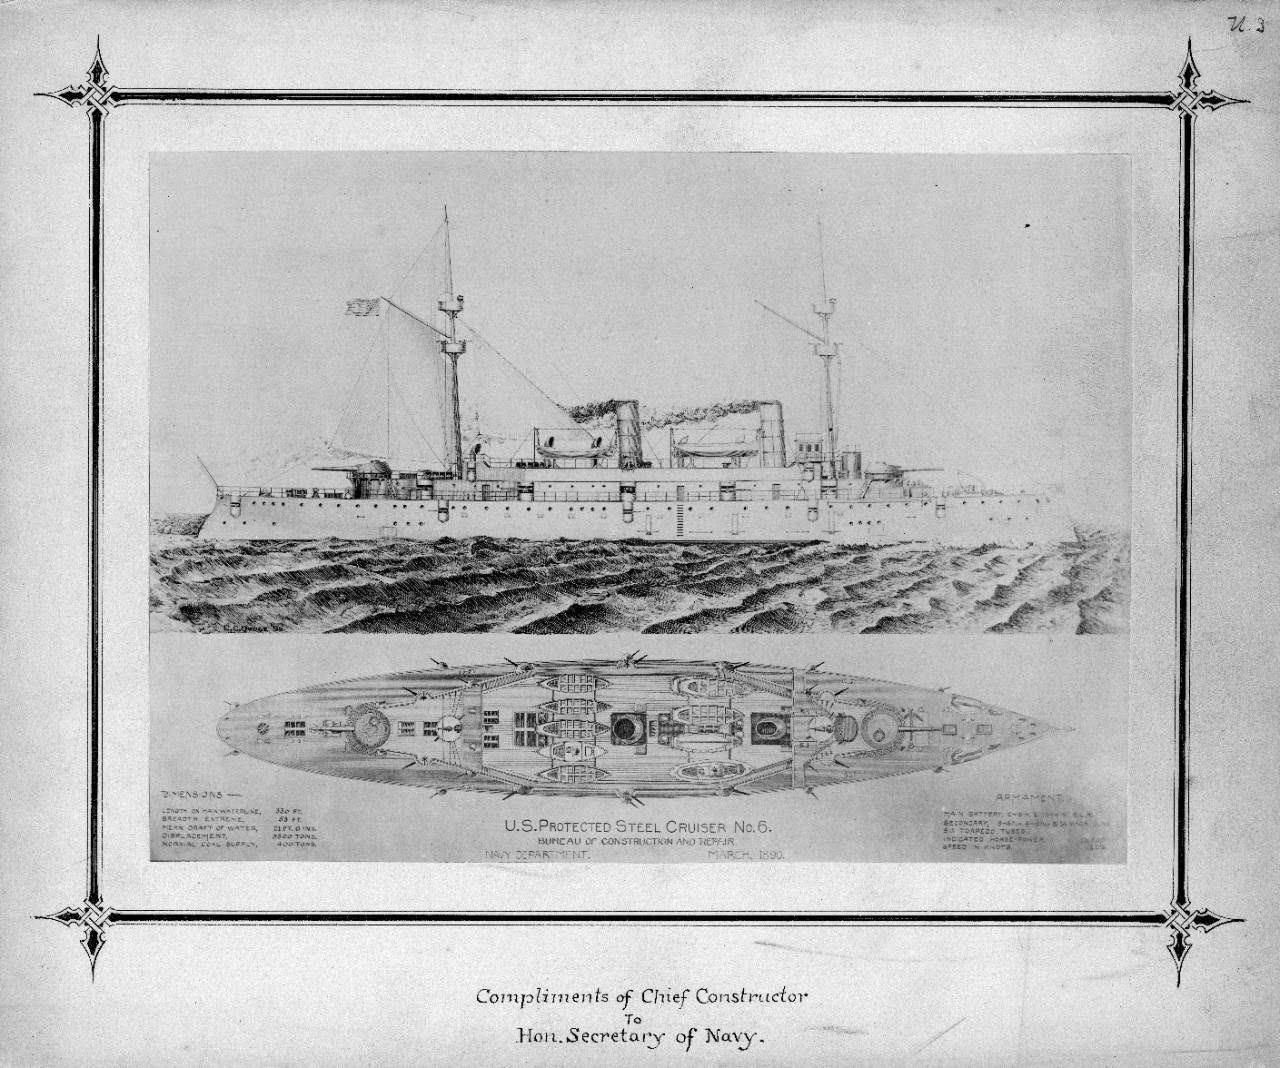 Six prints of Naval Constructor’s drawings mounted on hard cardboard with gilded edges. Donated by the Naval Historical Foundation, original donor unknown. Drawings presented to the Secretary of the Navy by the Chief Constructor of the U.S. Navy, about 1880-1890.